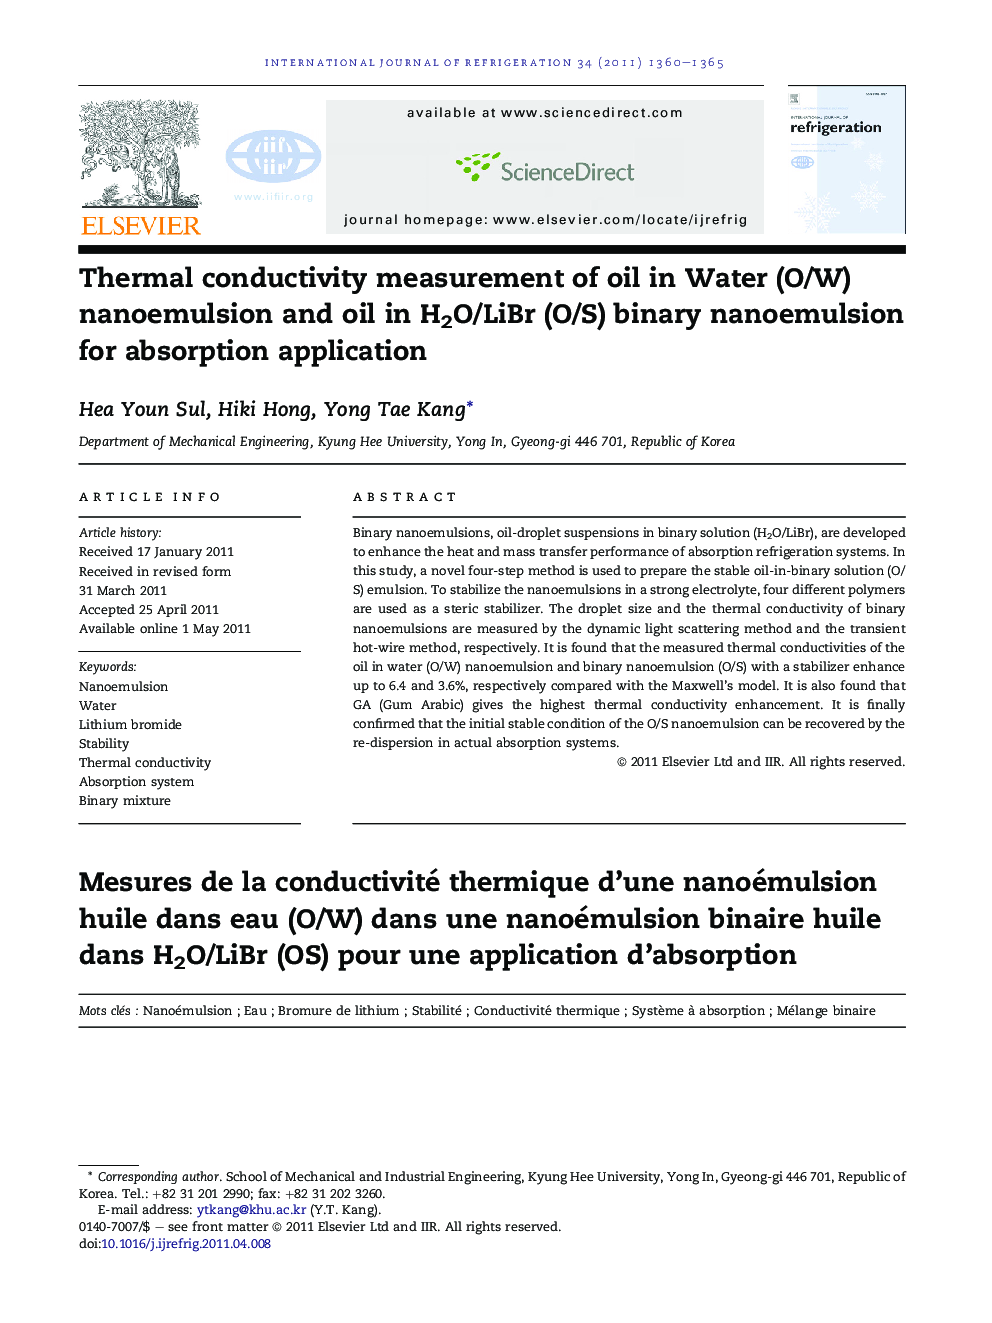 Thermal conductivity measurement of oil in Water (O/W) nanoemulsion and oil in H2O/LiBr (O/S) binary nanoemulsion for absorption application